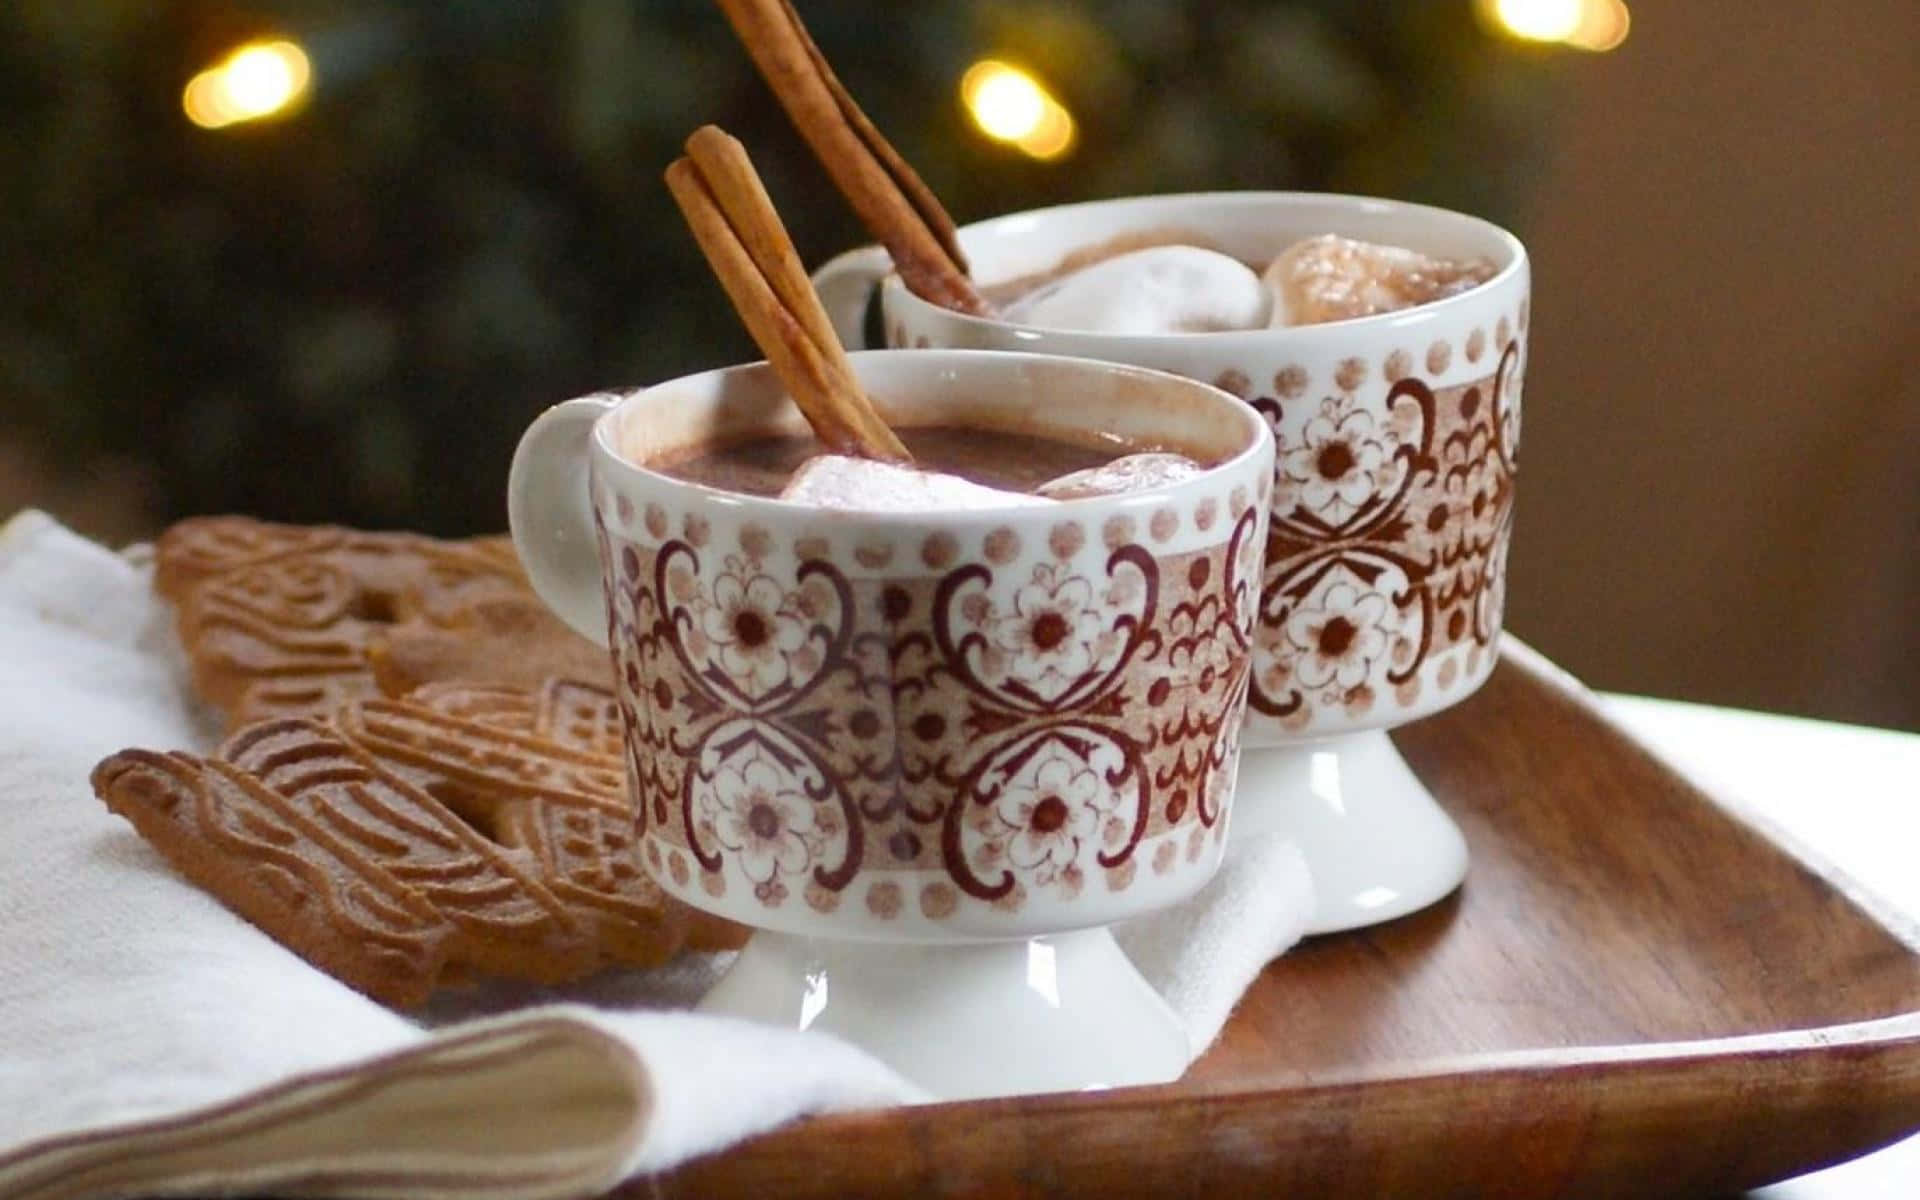 Hot Chocolate Photos Download The BEST Free Hot Chocolate Stock Photos   HD Images